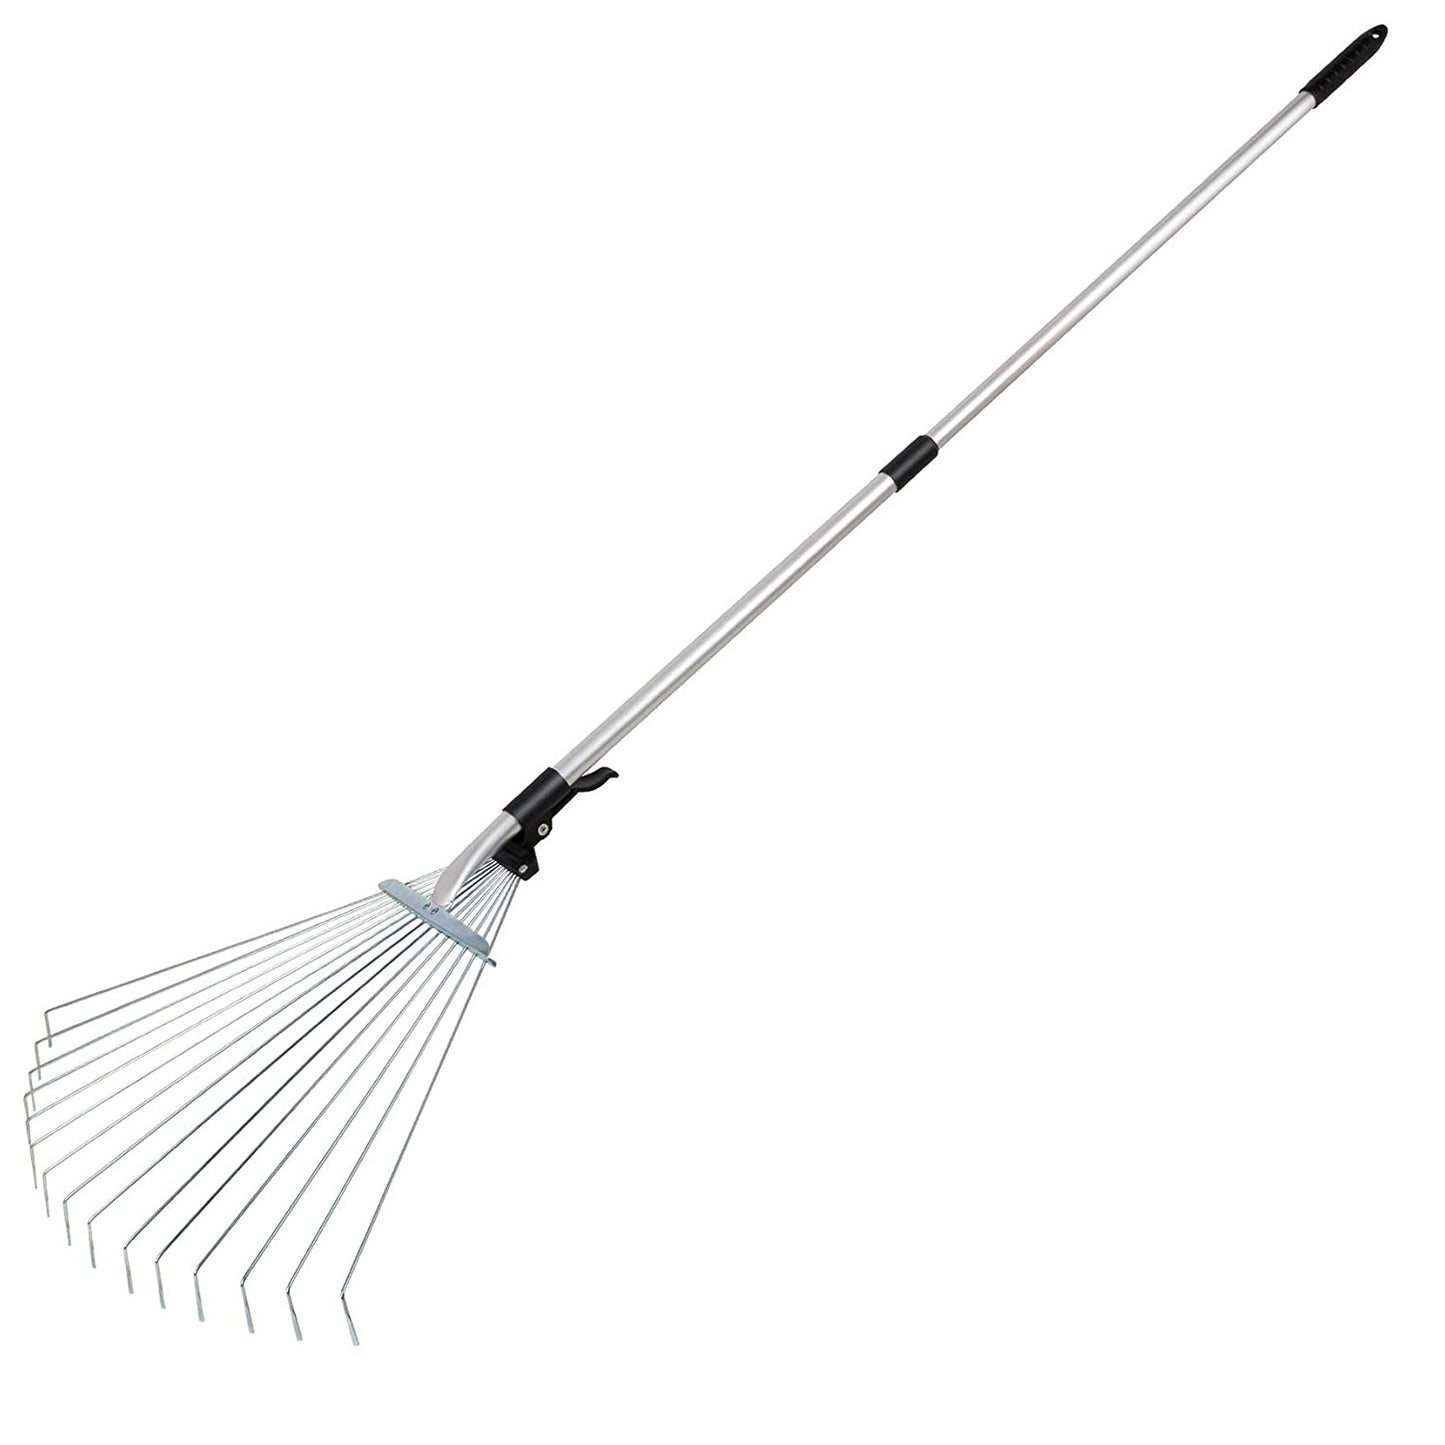 Expanding Stainless Steel Rake For Quick Clean Lawn Yard Garden